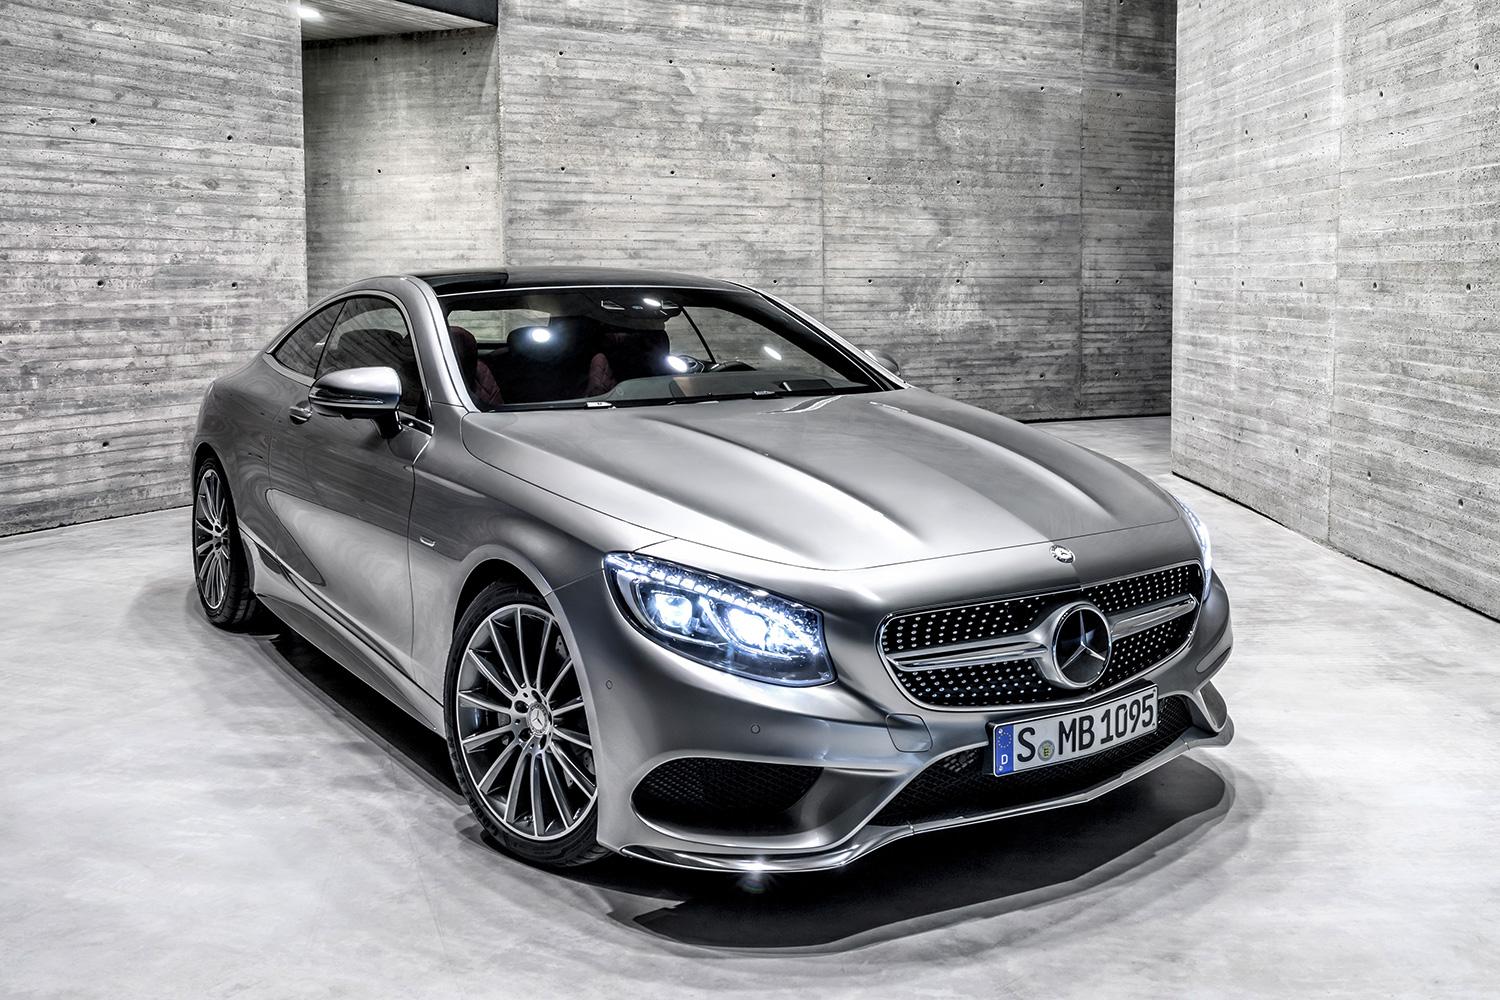 2015 Mercedes S Class Coupe front left angle